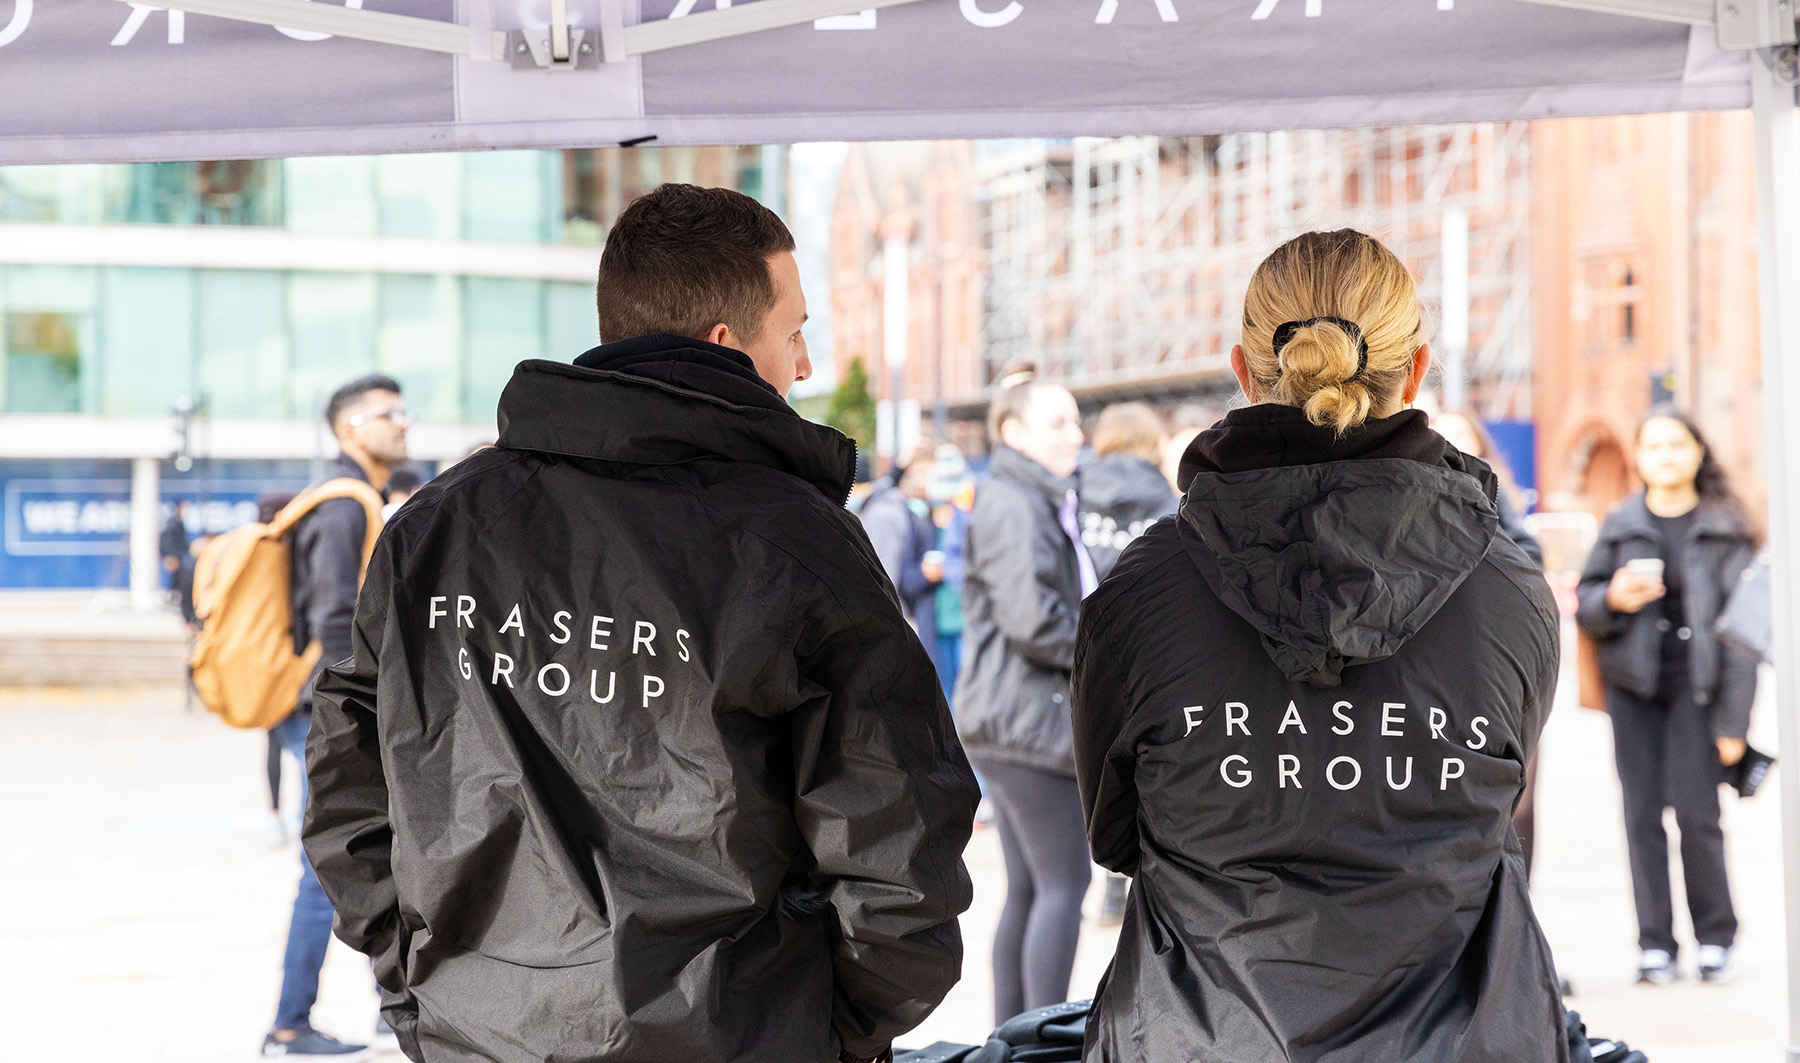 The back of 2 Frasers Group promoters wearing branded jackets